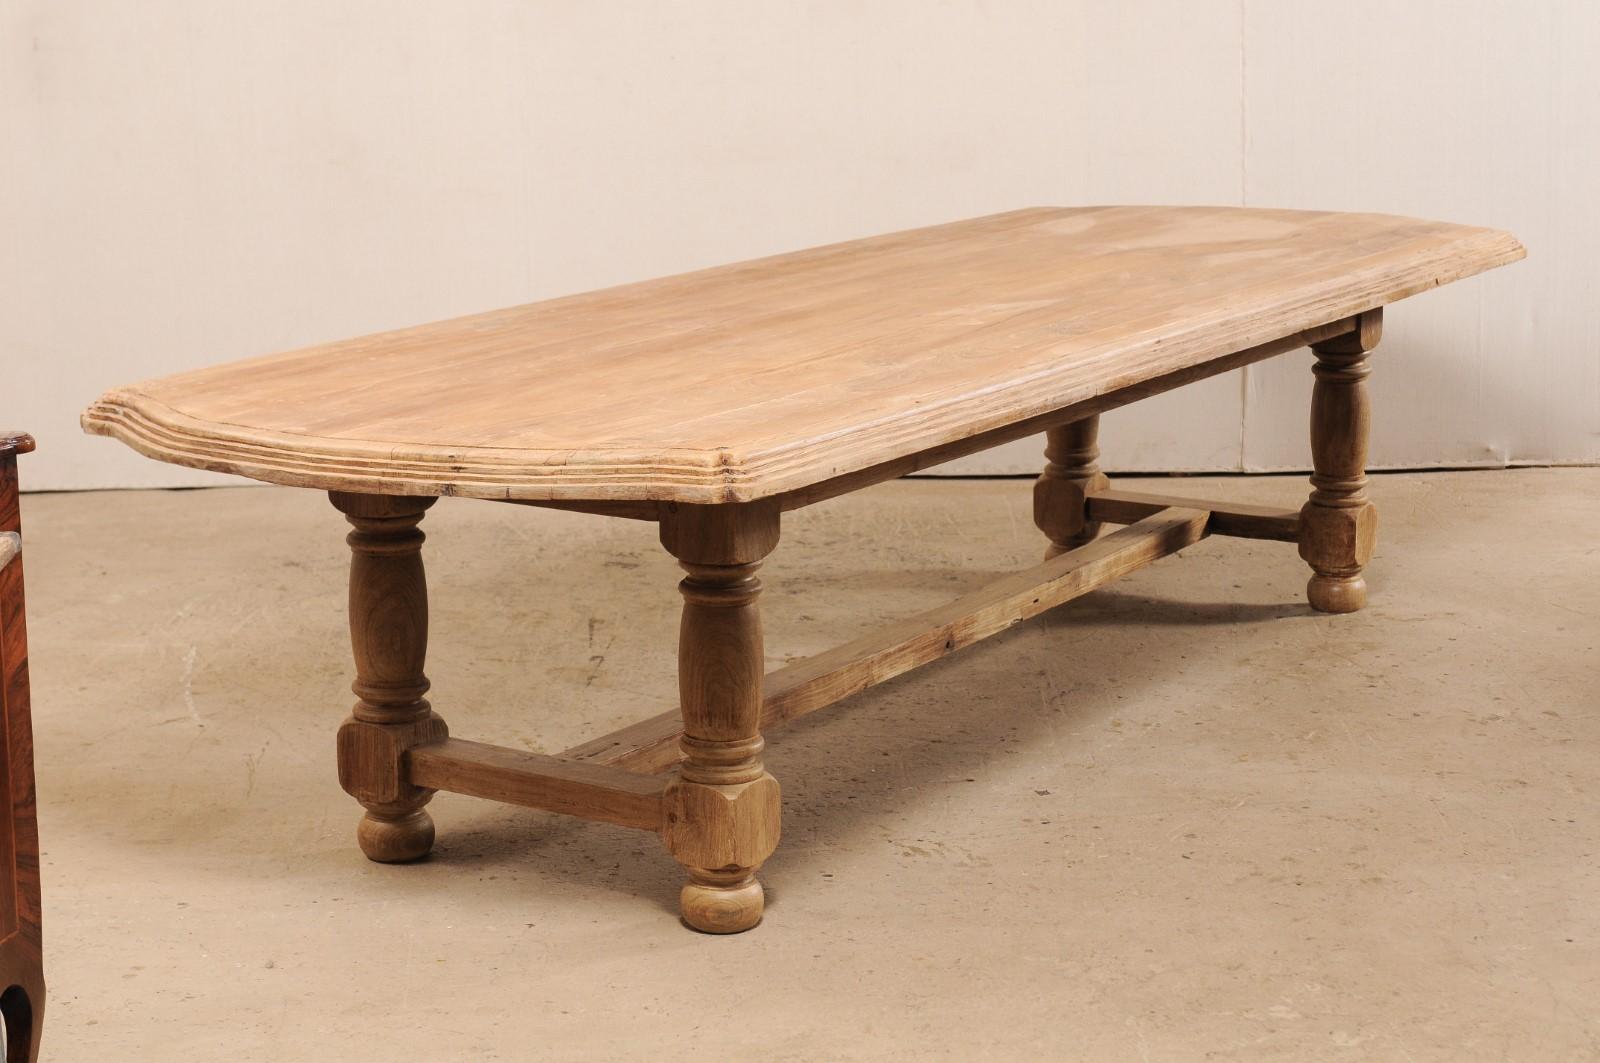 A large sized Anglo-Indian dining table fashioned from very sturdy reclaimed teak from the 19th century. This antique dining table has an overall rectangular-shaped top with rounded edges and subtly arched extensions at either far end. It is nicely